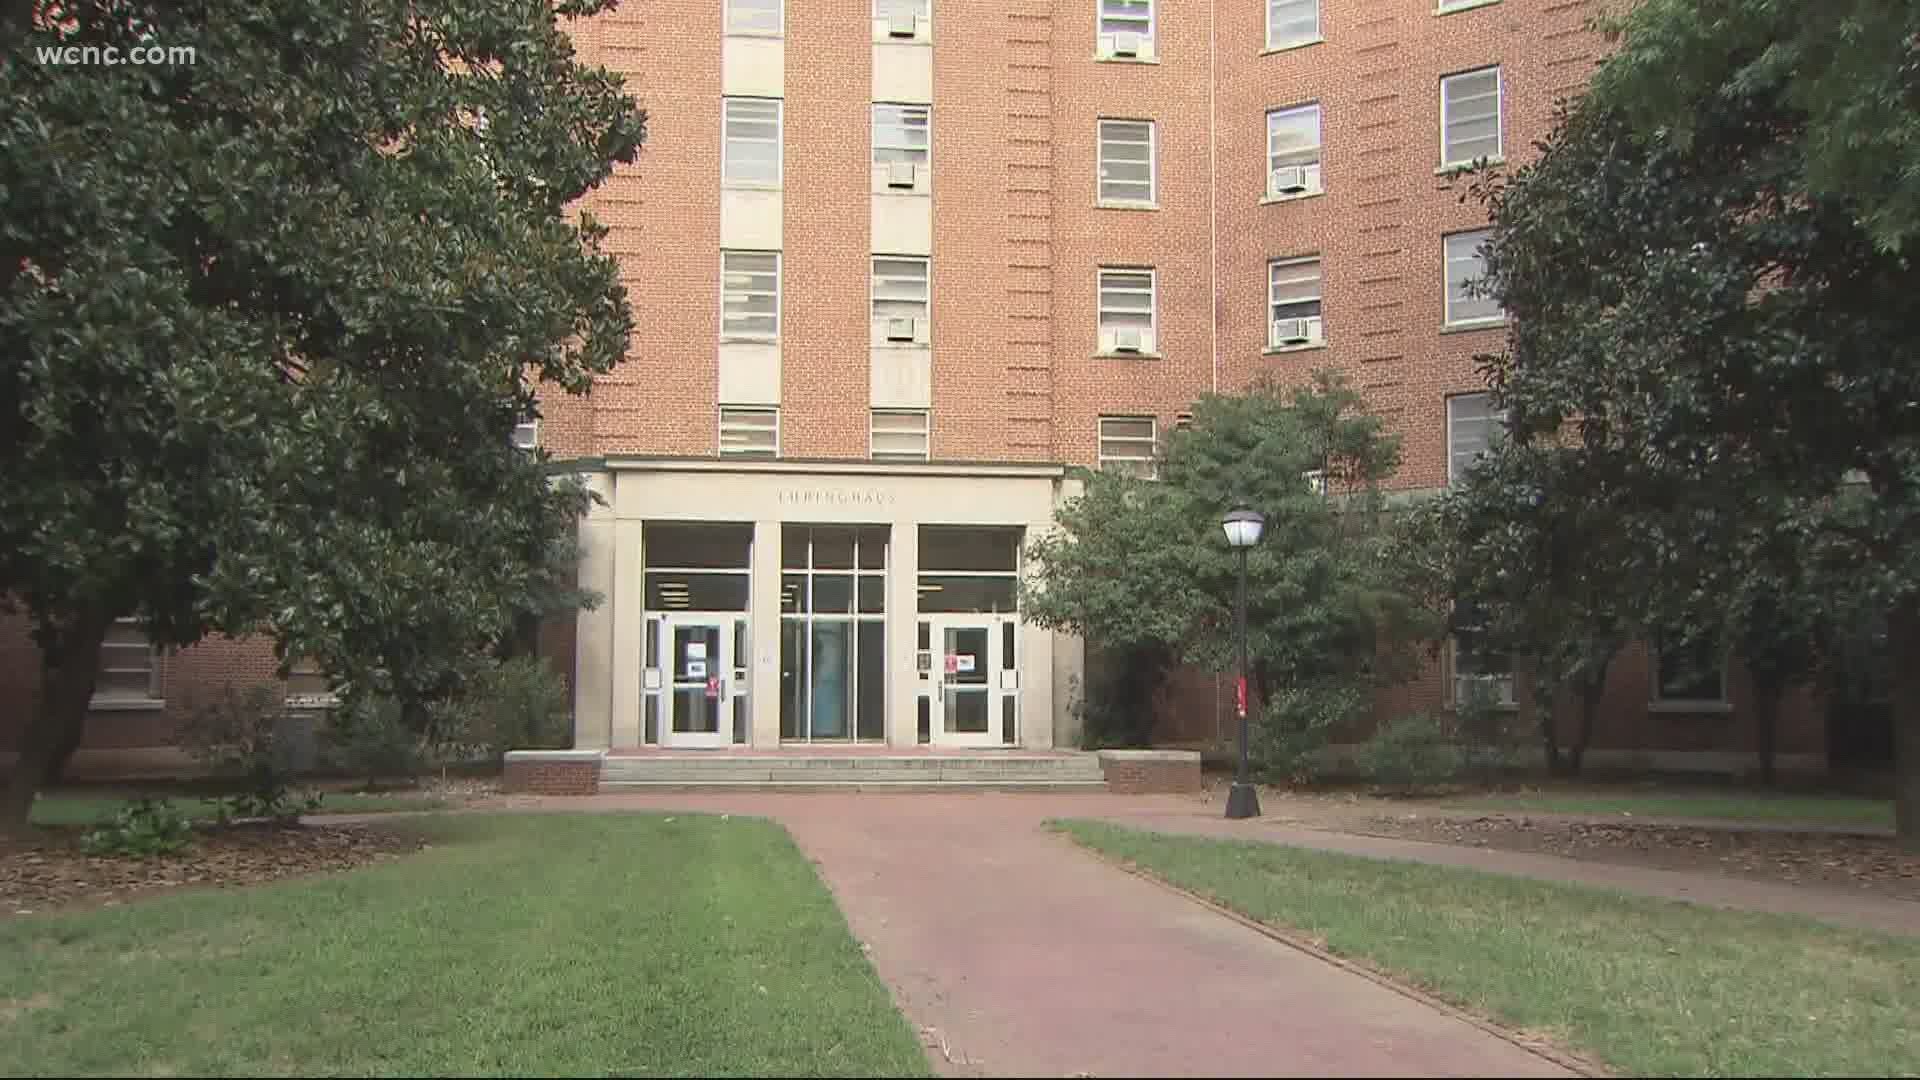 A cluster is five or more cases. An alert that went out Saturday said the outbreak was from a UNC fraternity.